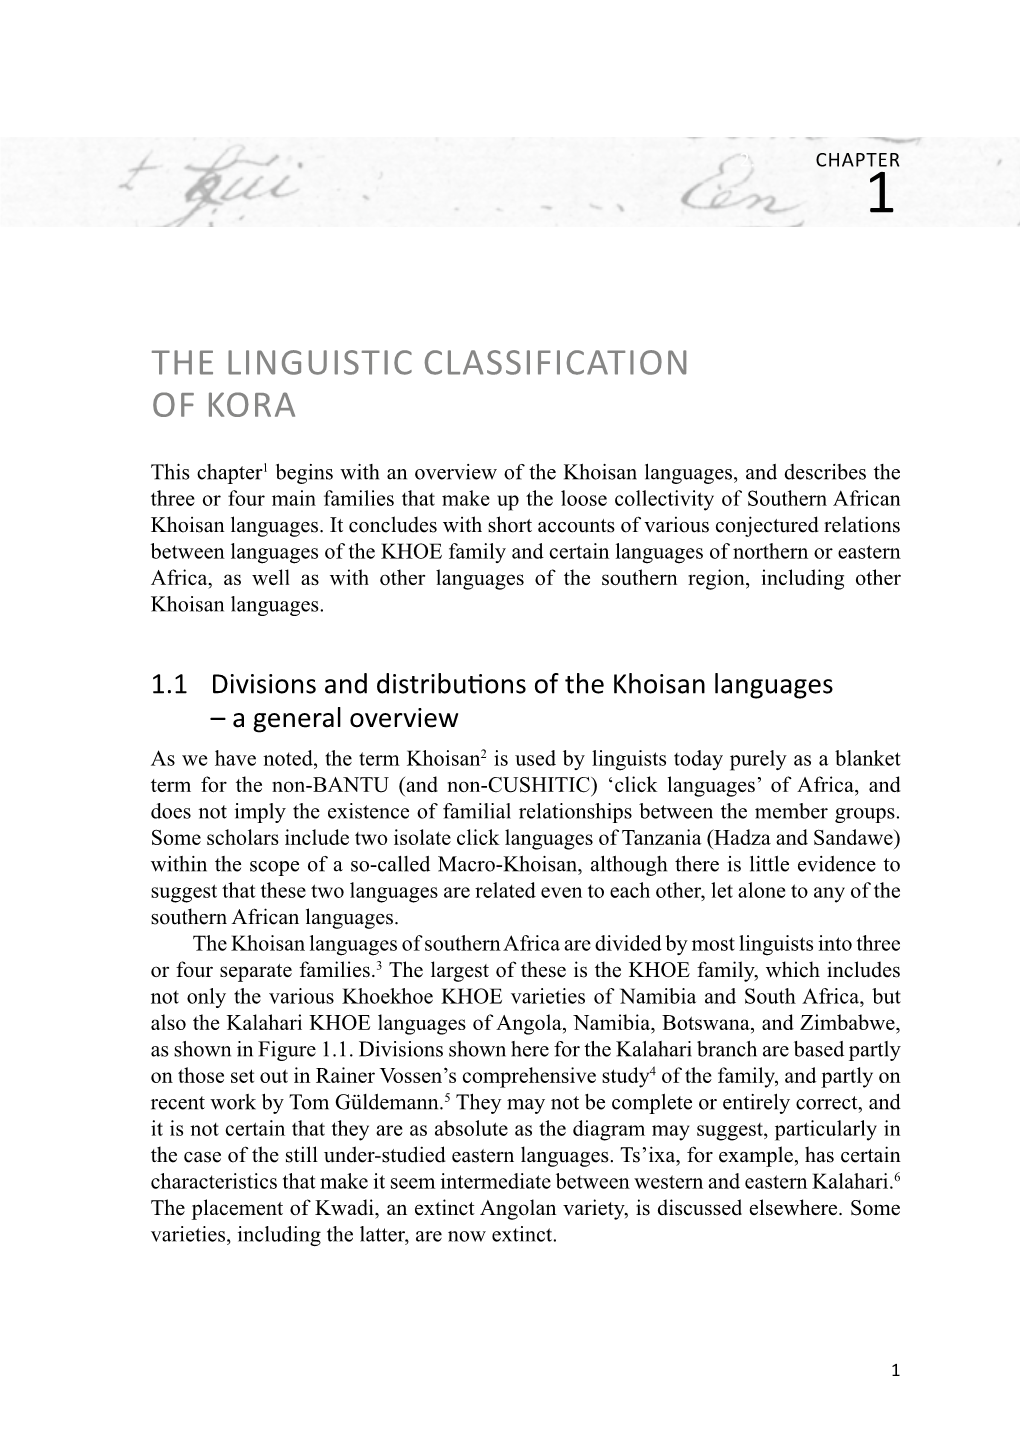 The Linguistic Classification of Kora